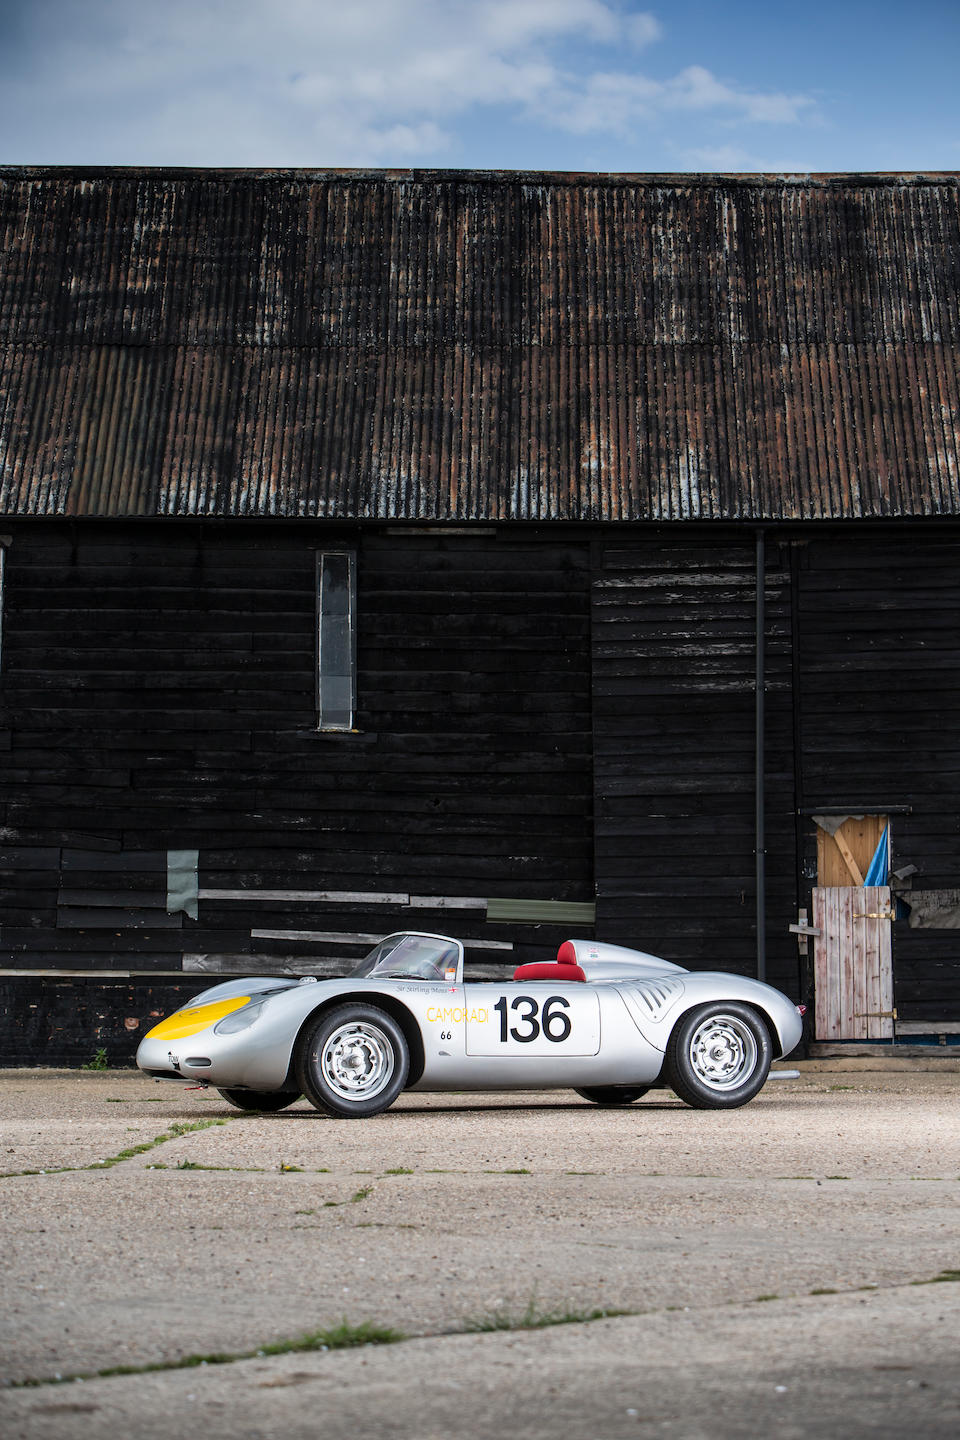 The Property of Sir Stirling Moss OBE The Ex-Bob Holbert, 'Gentleman Tom' Payne, Millard Ripley,1961 Porsche RS-61 Spyder Sports-Racing Two-Seater  Chassis no. 718-070